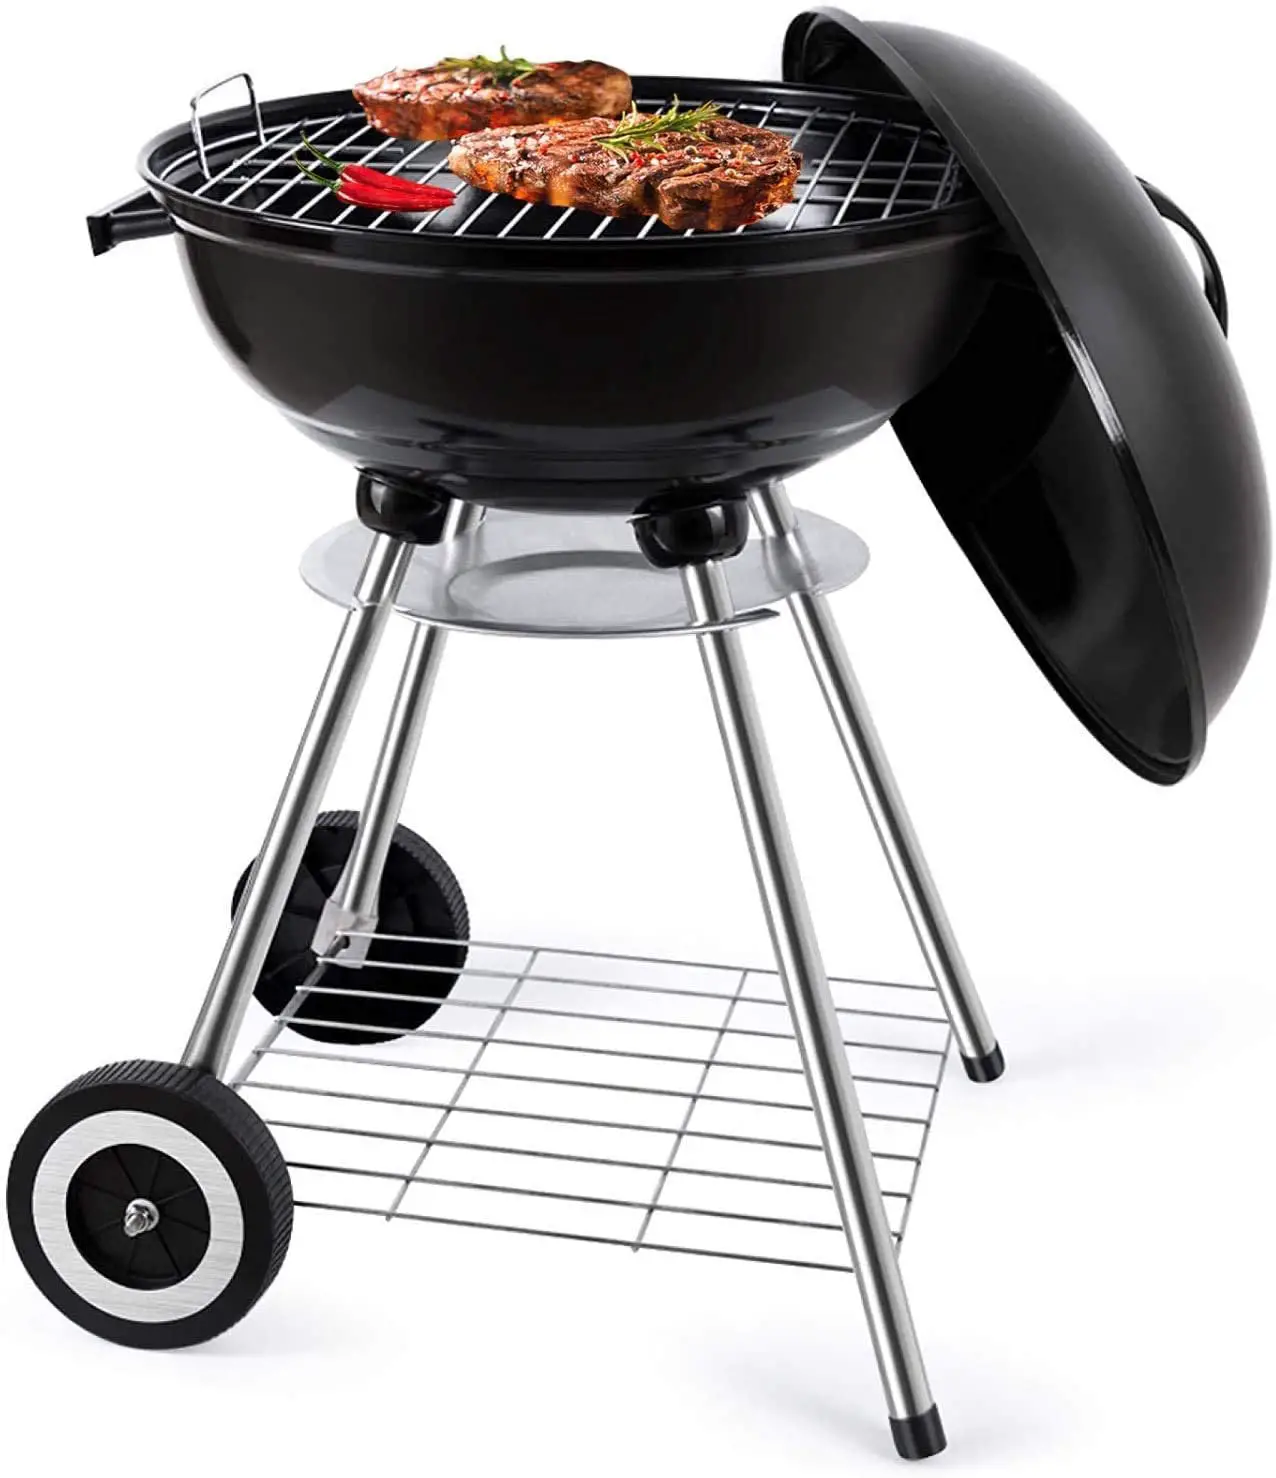 BBQ Kettle Charcoal Grill Outdoor Portable Grill Backyard Cooking ...